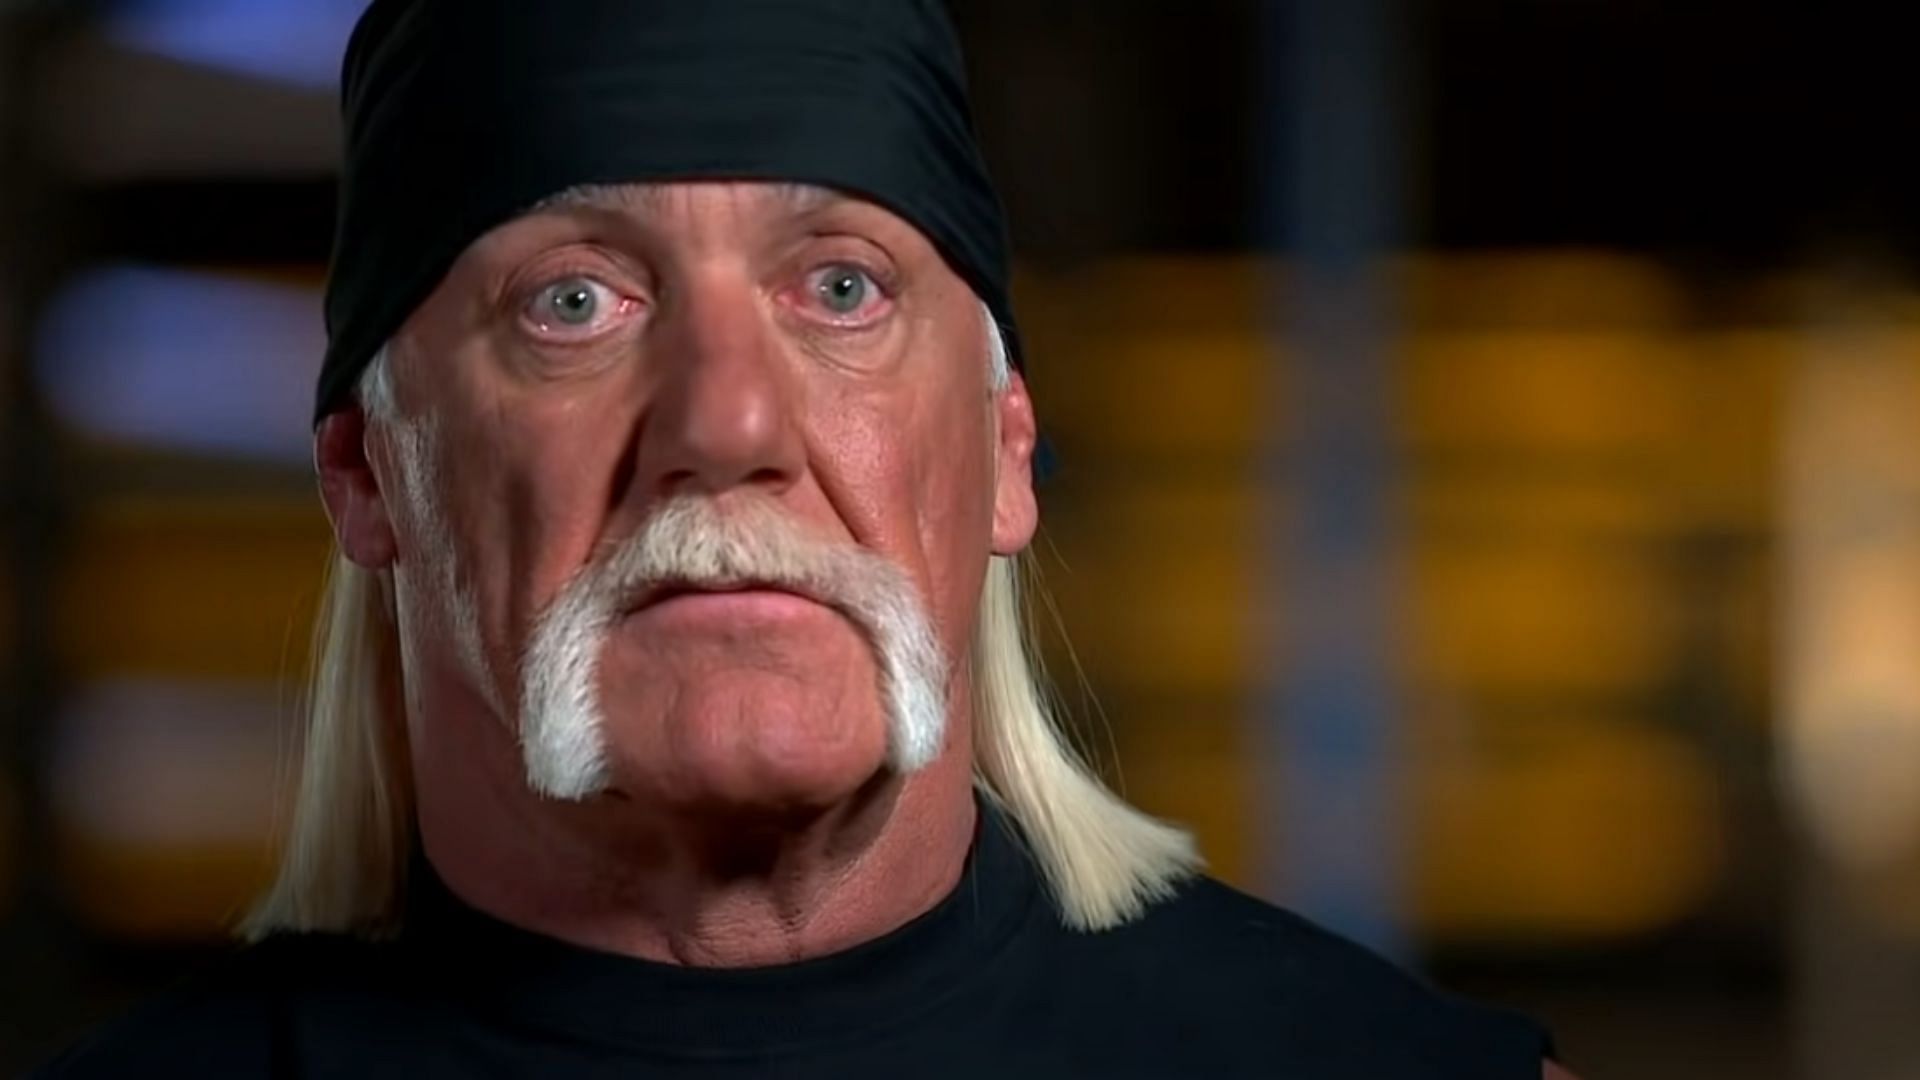 Hulk Hogan legitimately thought his former opponent wanted to kill him ...